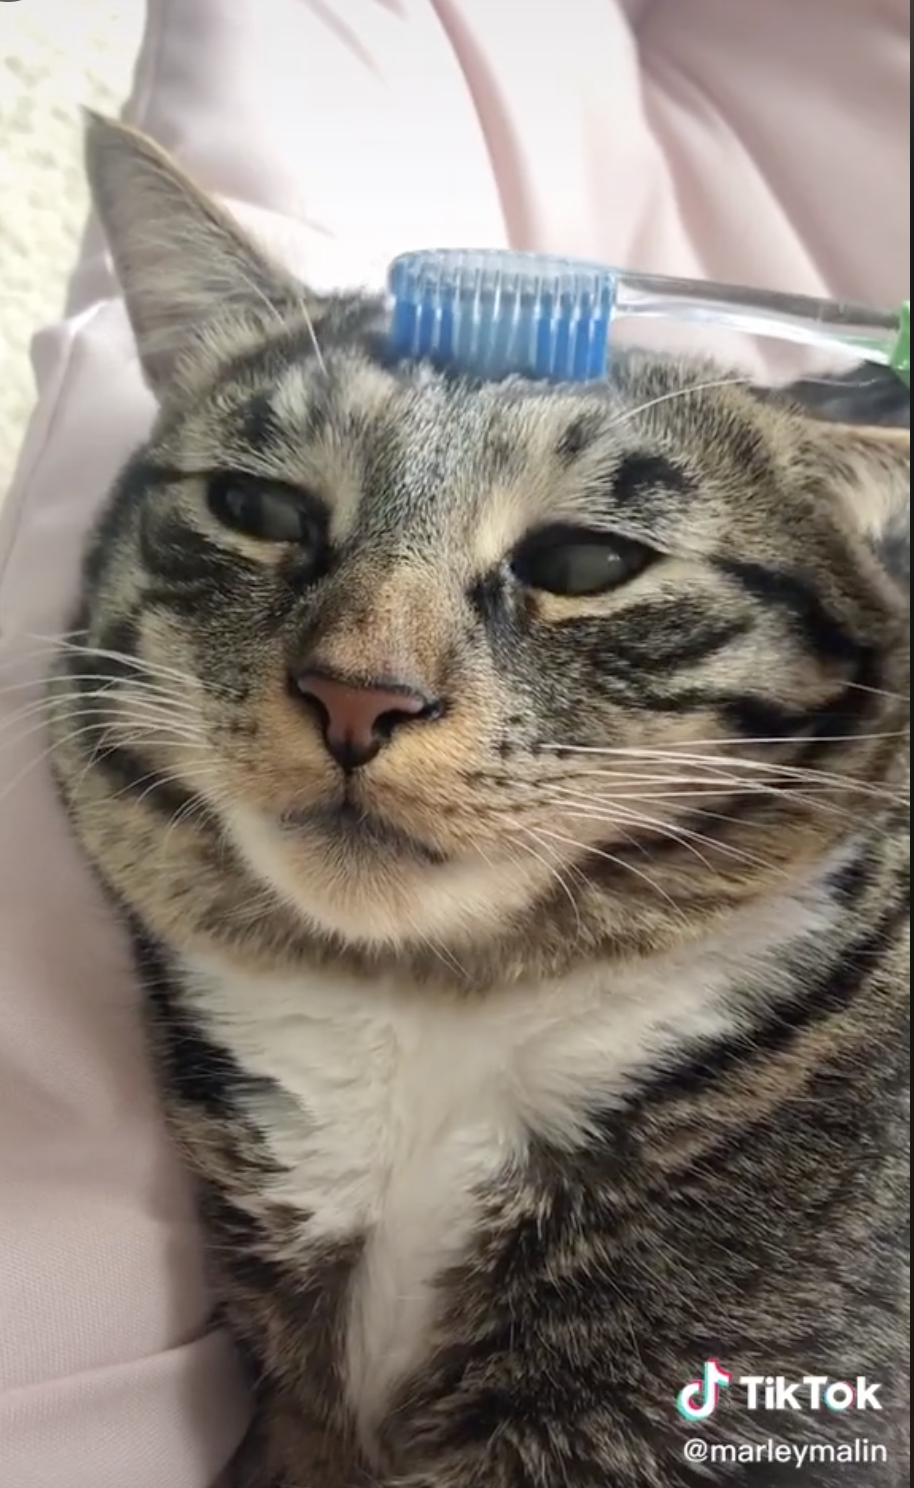 A cat looking totally serene as it&#x27;s pet by the toothbrush.